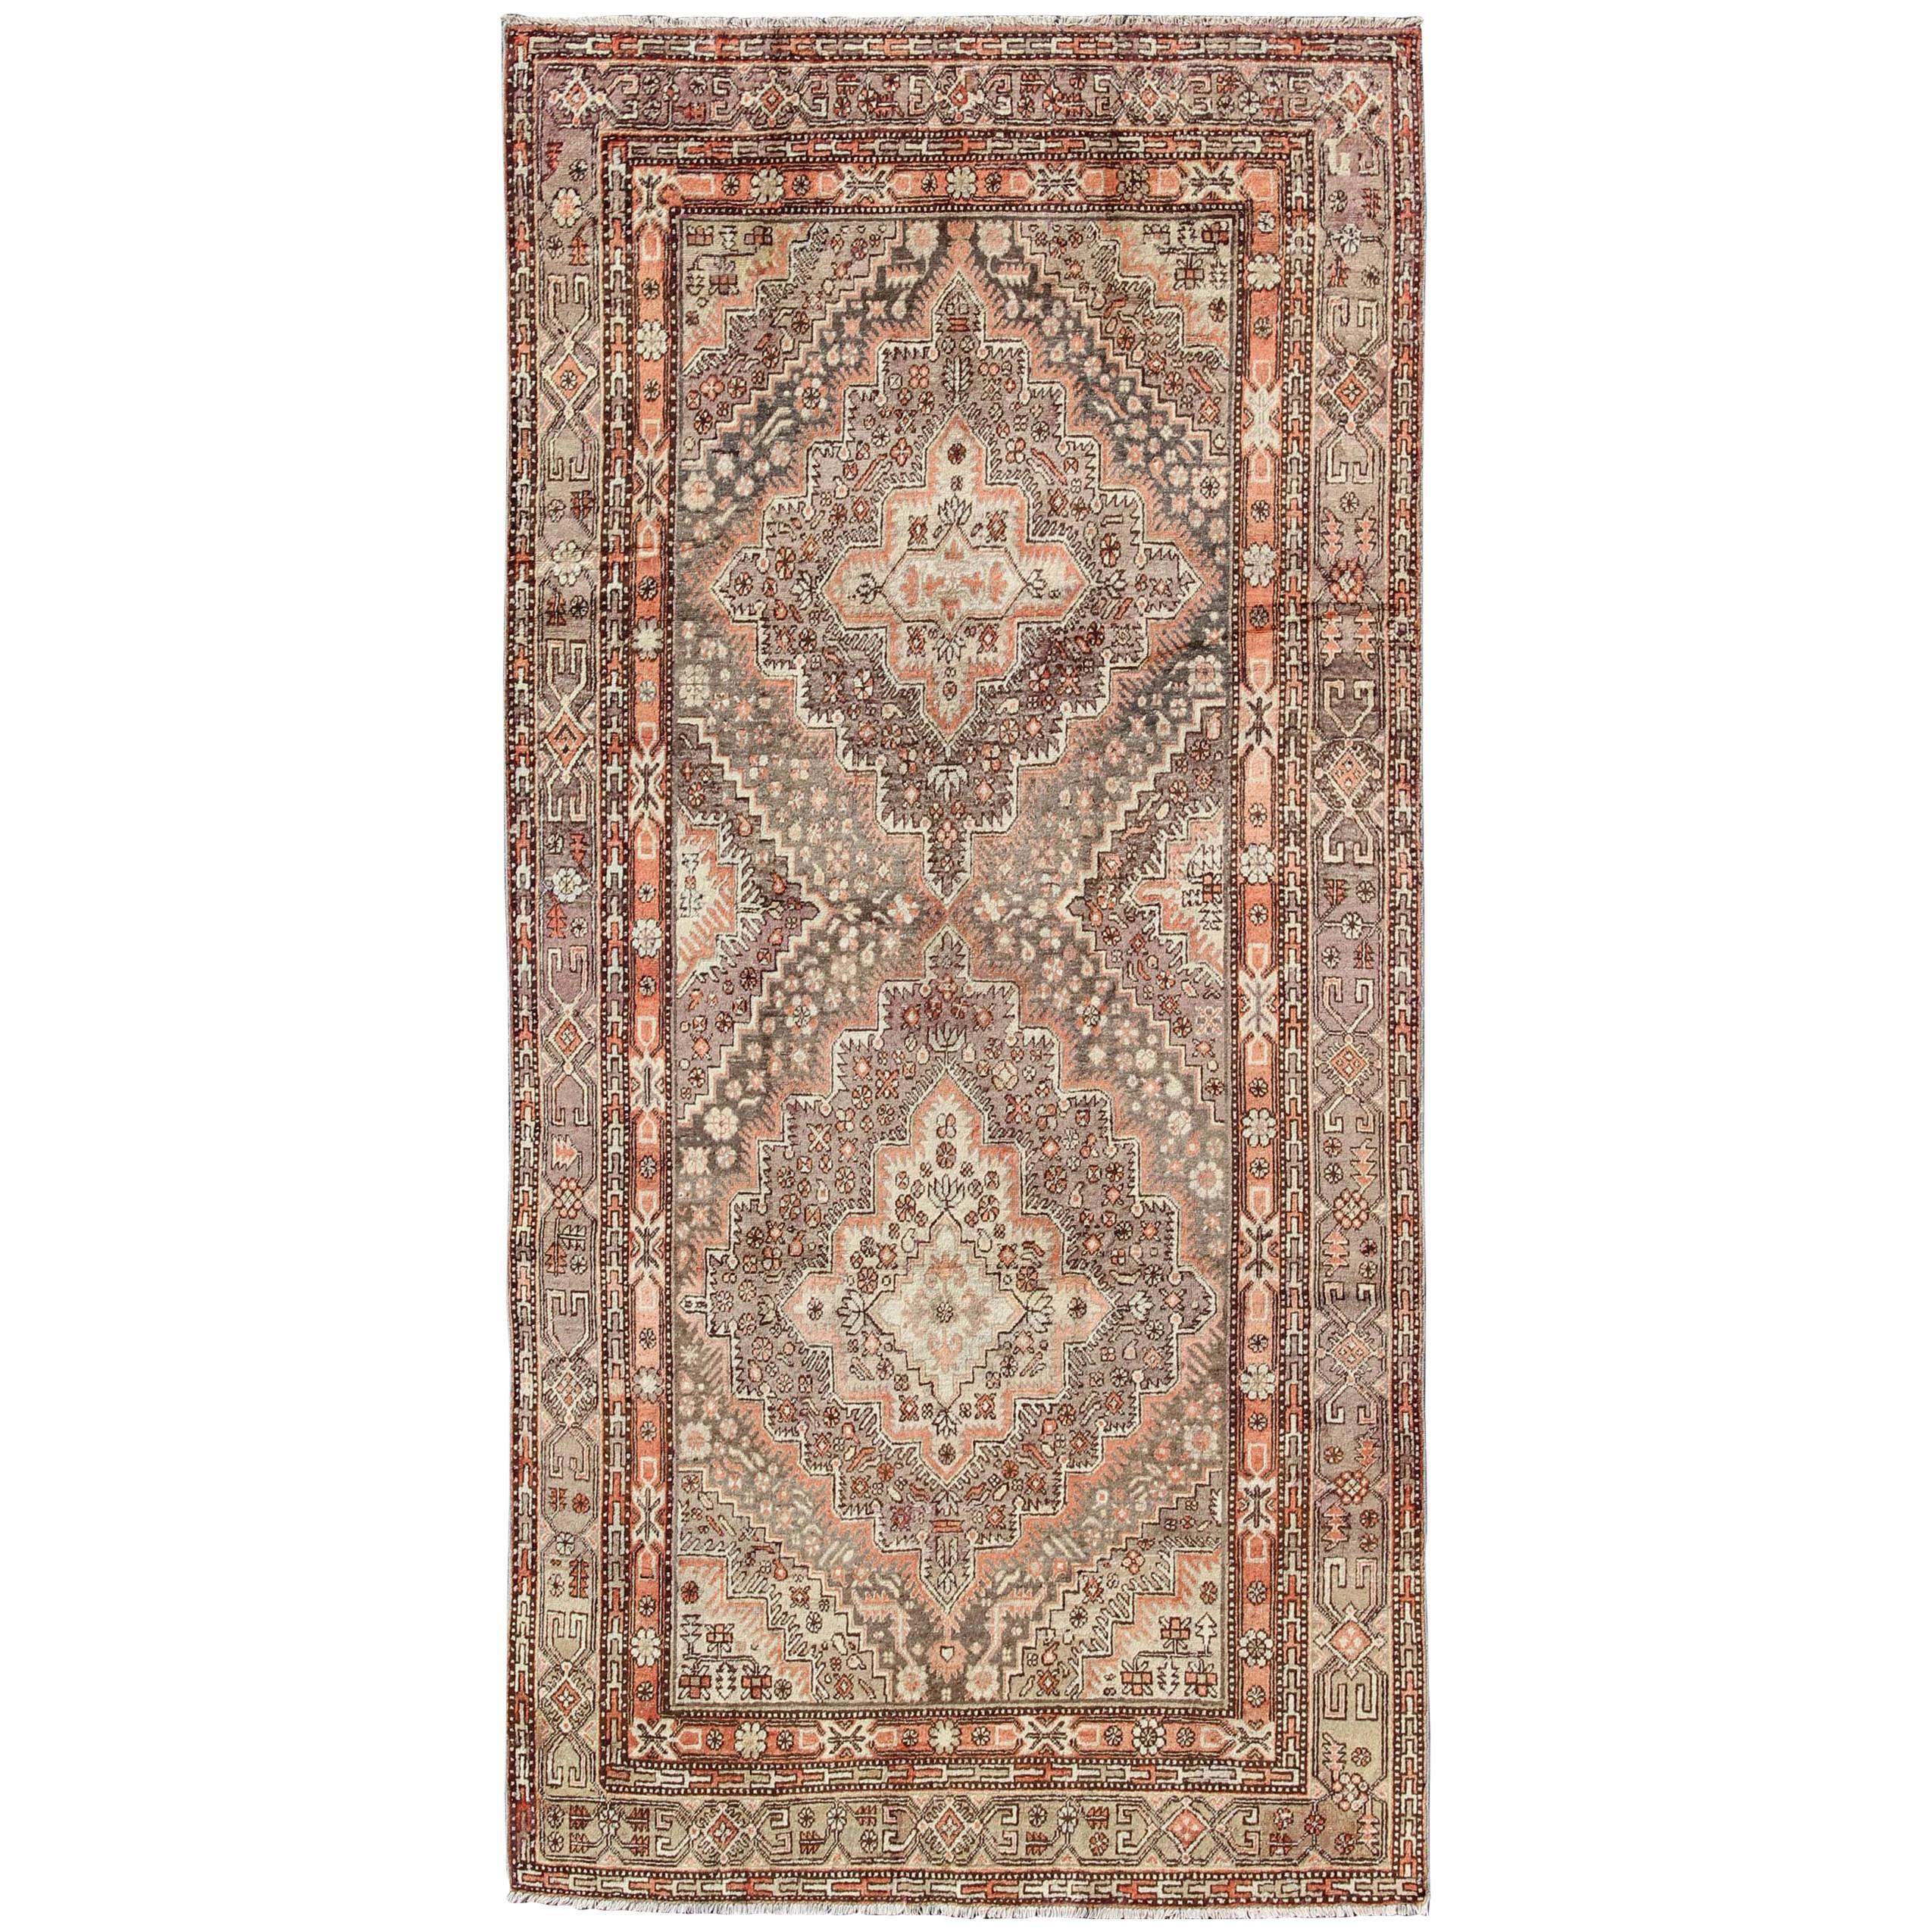 Early 20th Century Antique Khotan Rug with Paired Medallions in Gray and Red